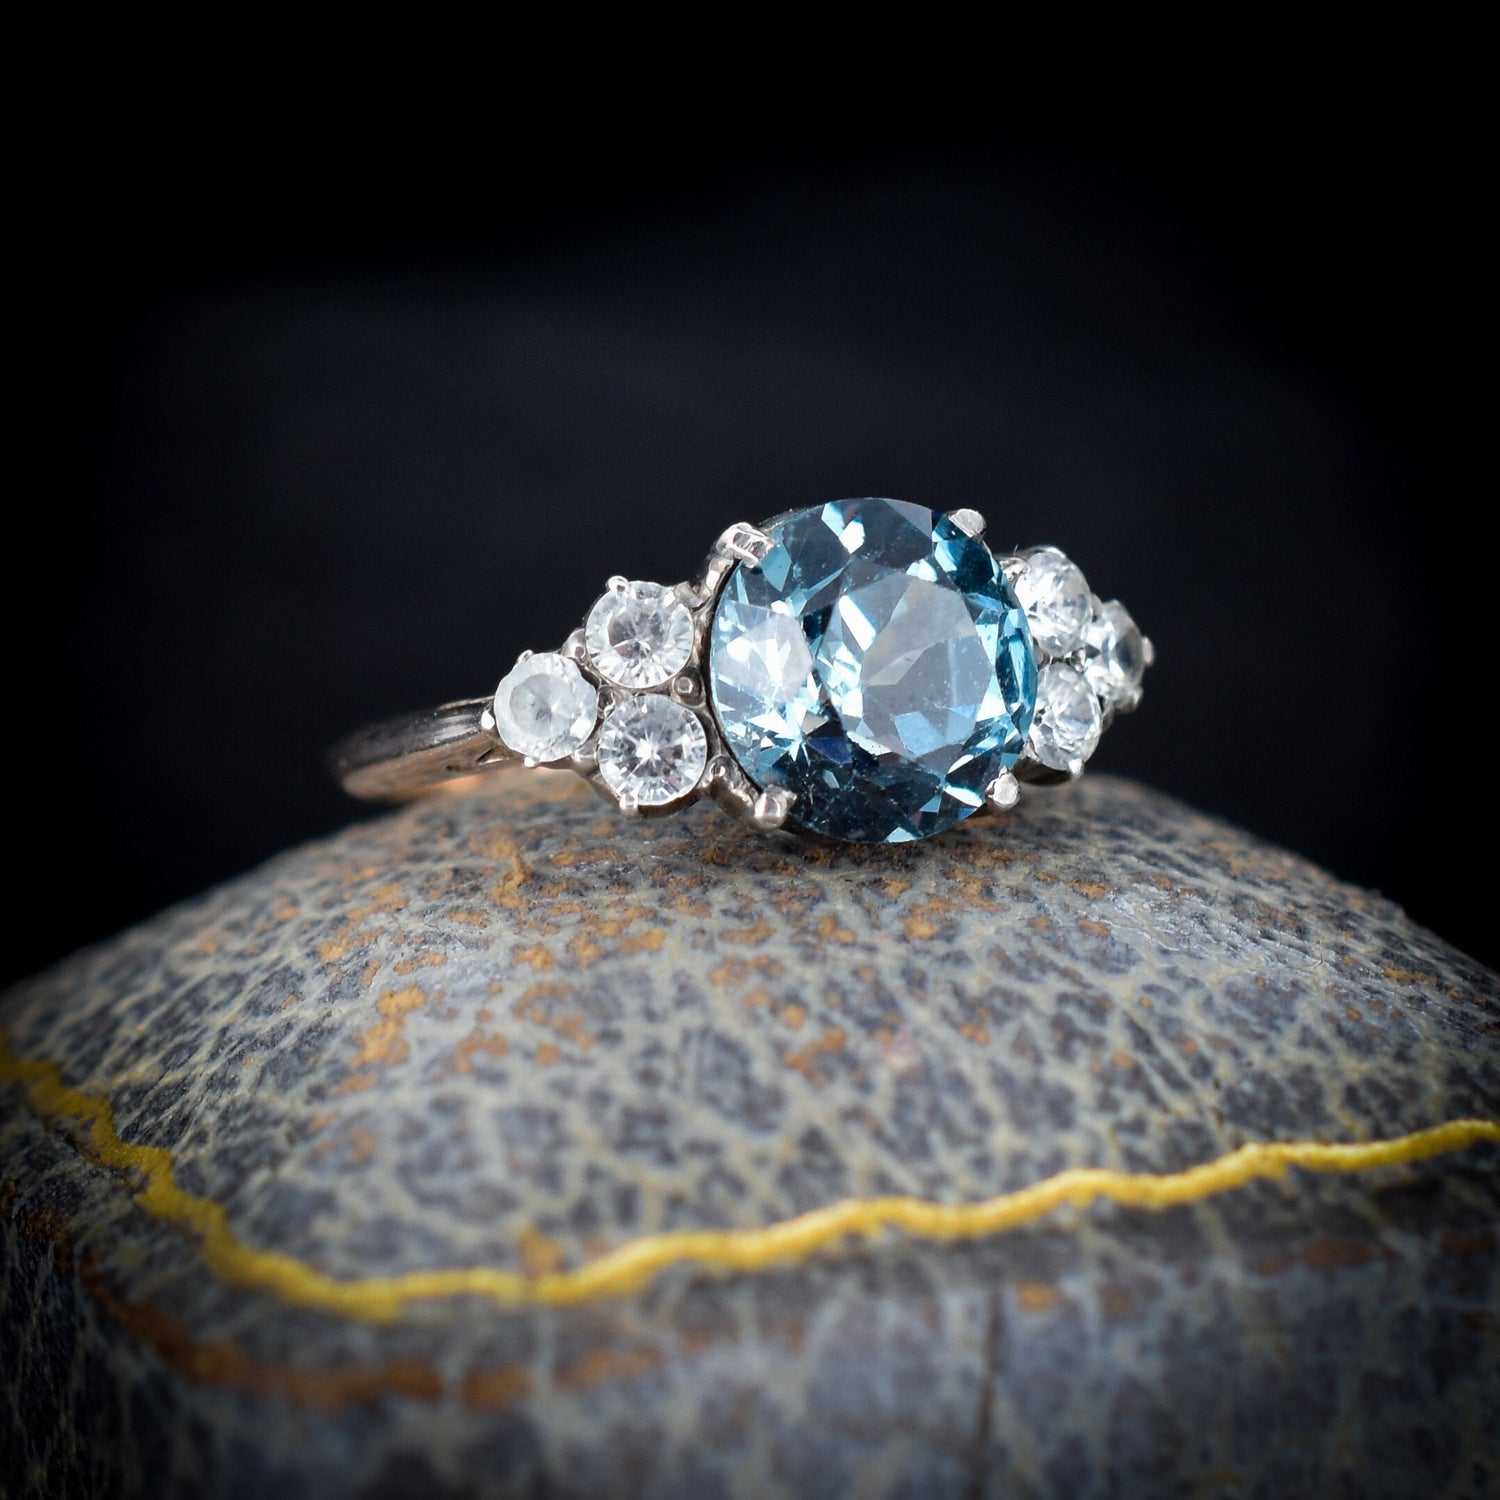 Antique Blue Zircon and White Sapphire 9ct Gold Ring | Art Deco